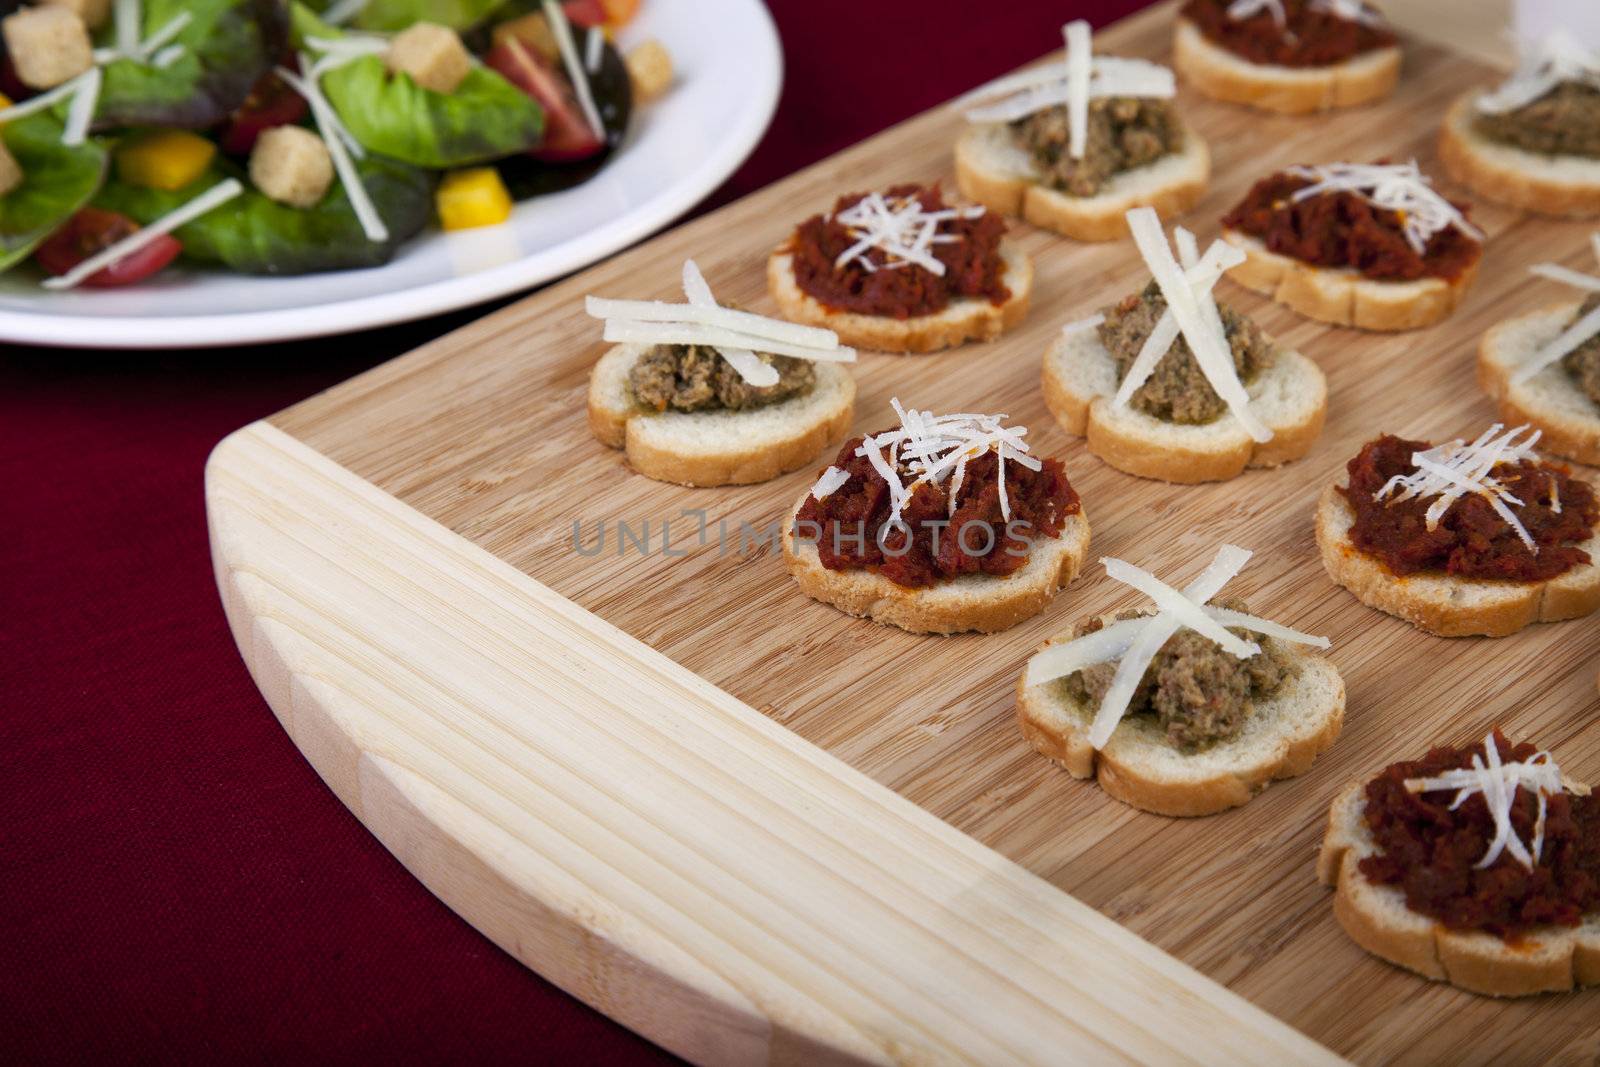 Fresh homemade sun dried tomato tapenade on toasted baguette topped with fresh grated cheese and a side salad.